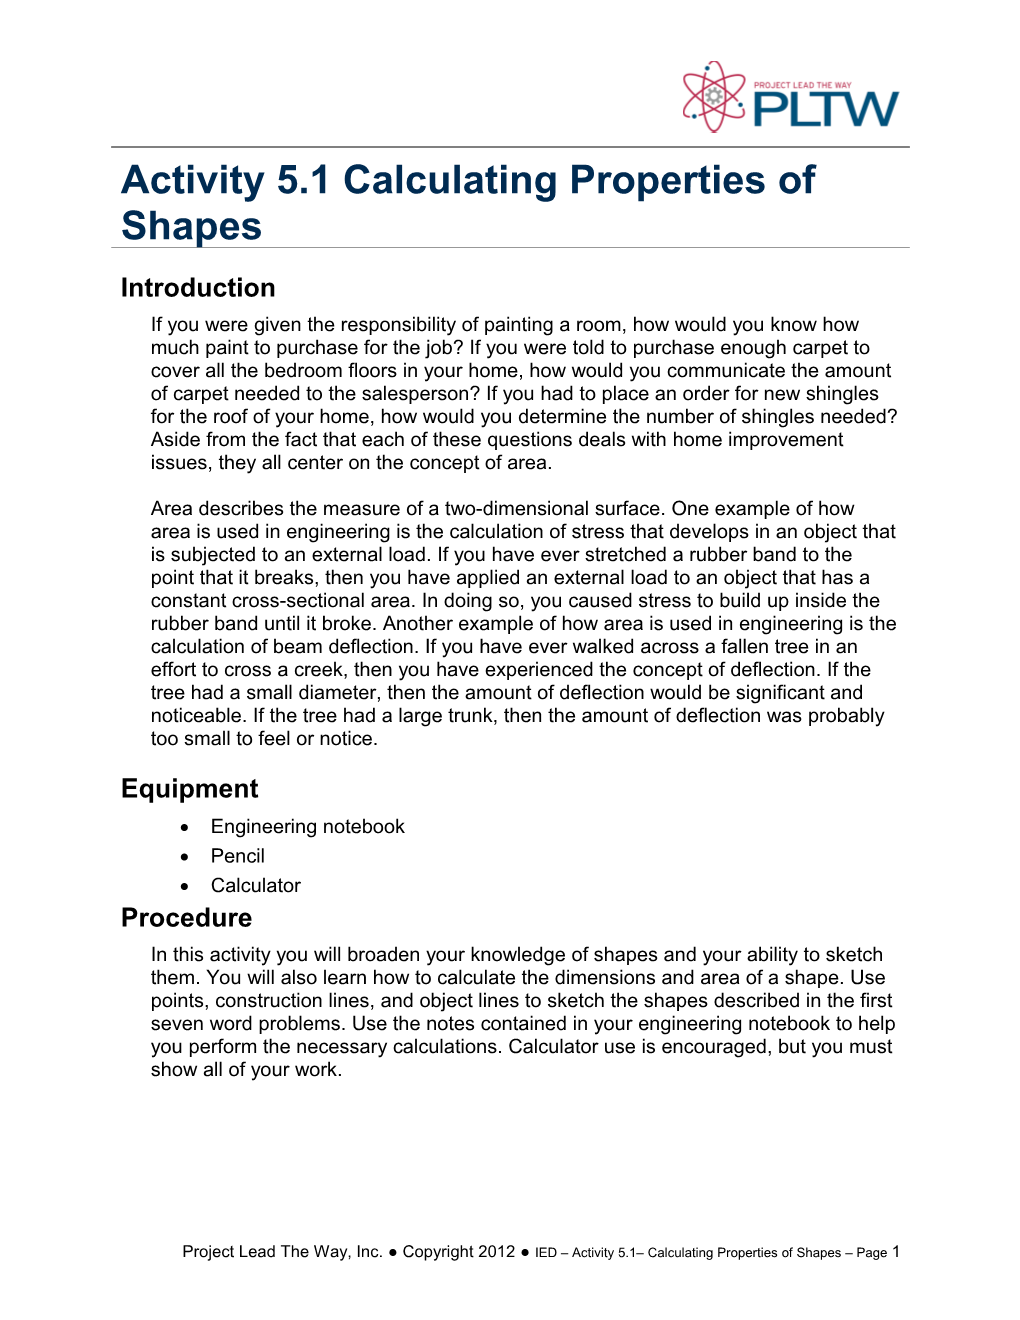 Activity 5.1 Calculating Properties of Shapes